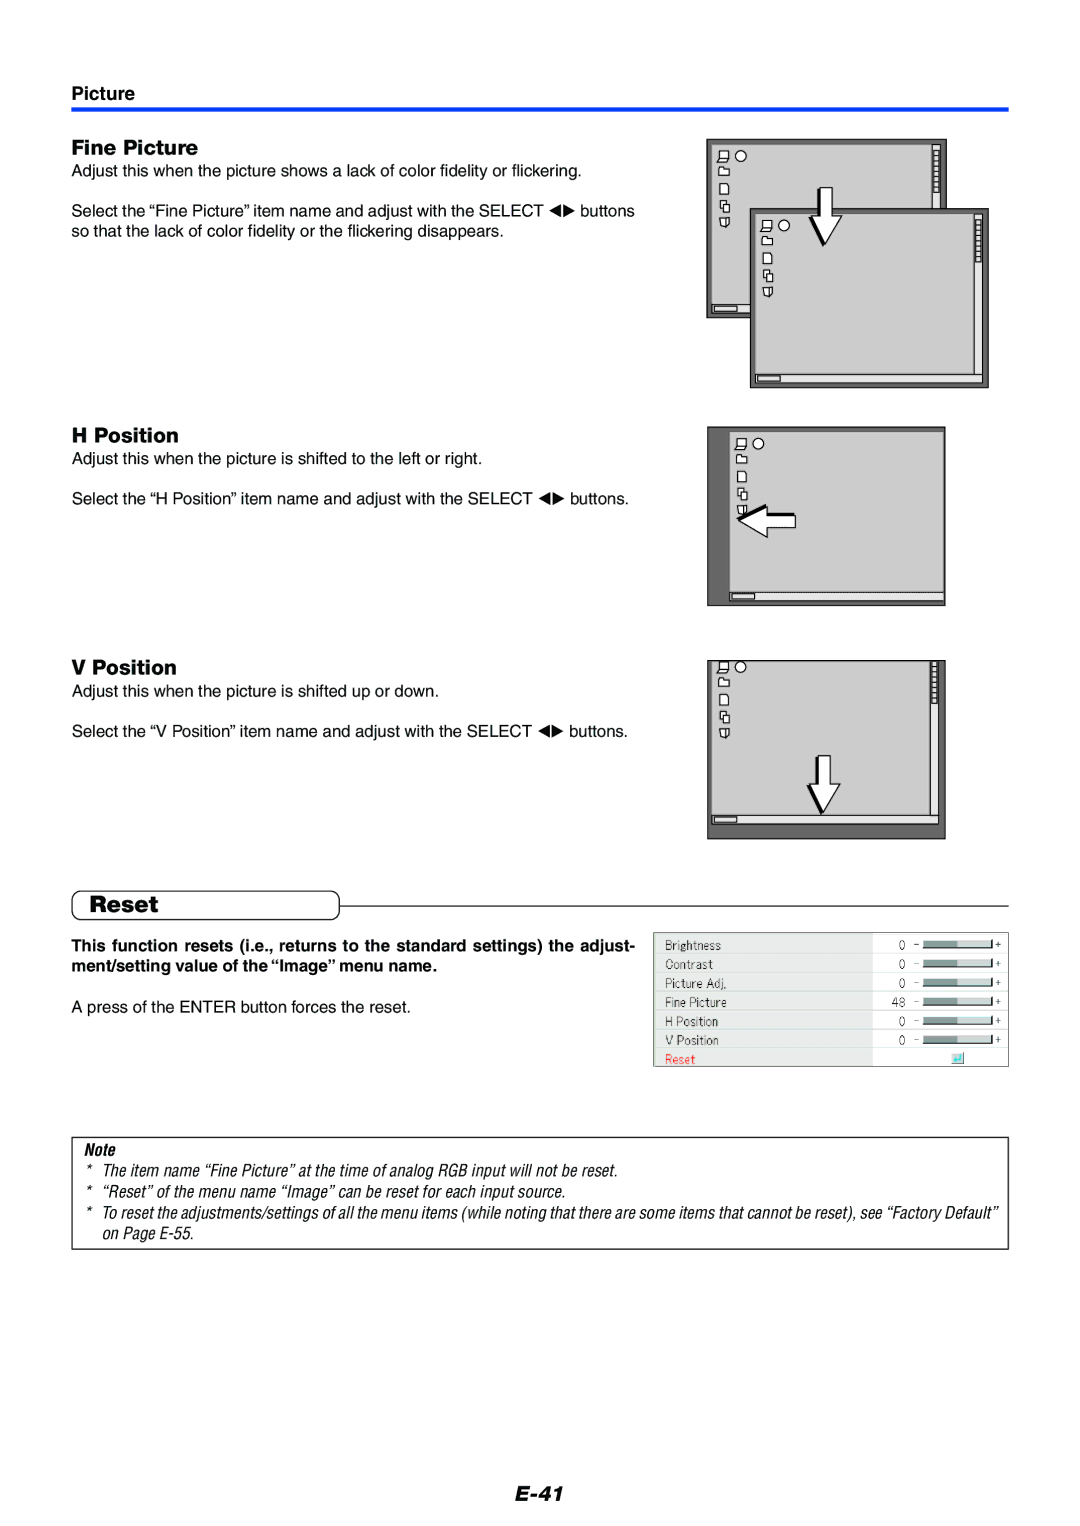 Mitsubishi Electronics XD50U user manual Reset, Fine Picture, Position, Press of the Enter button forces the reset 